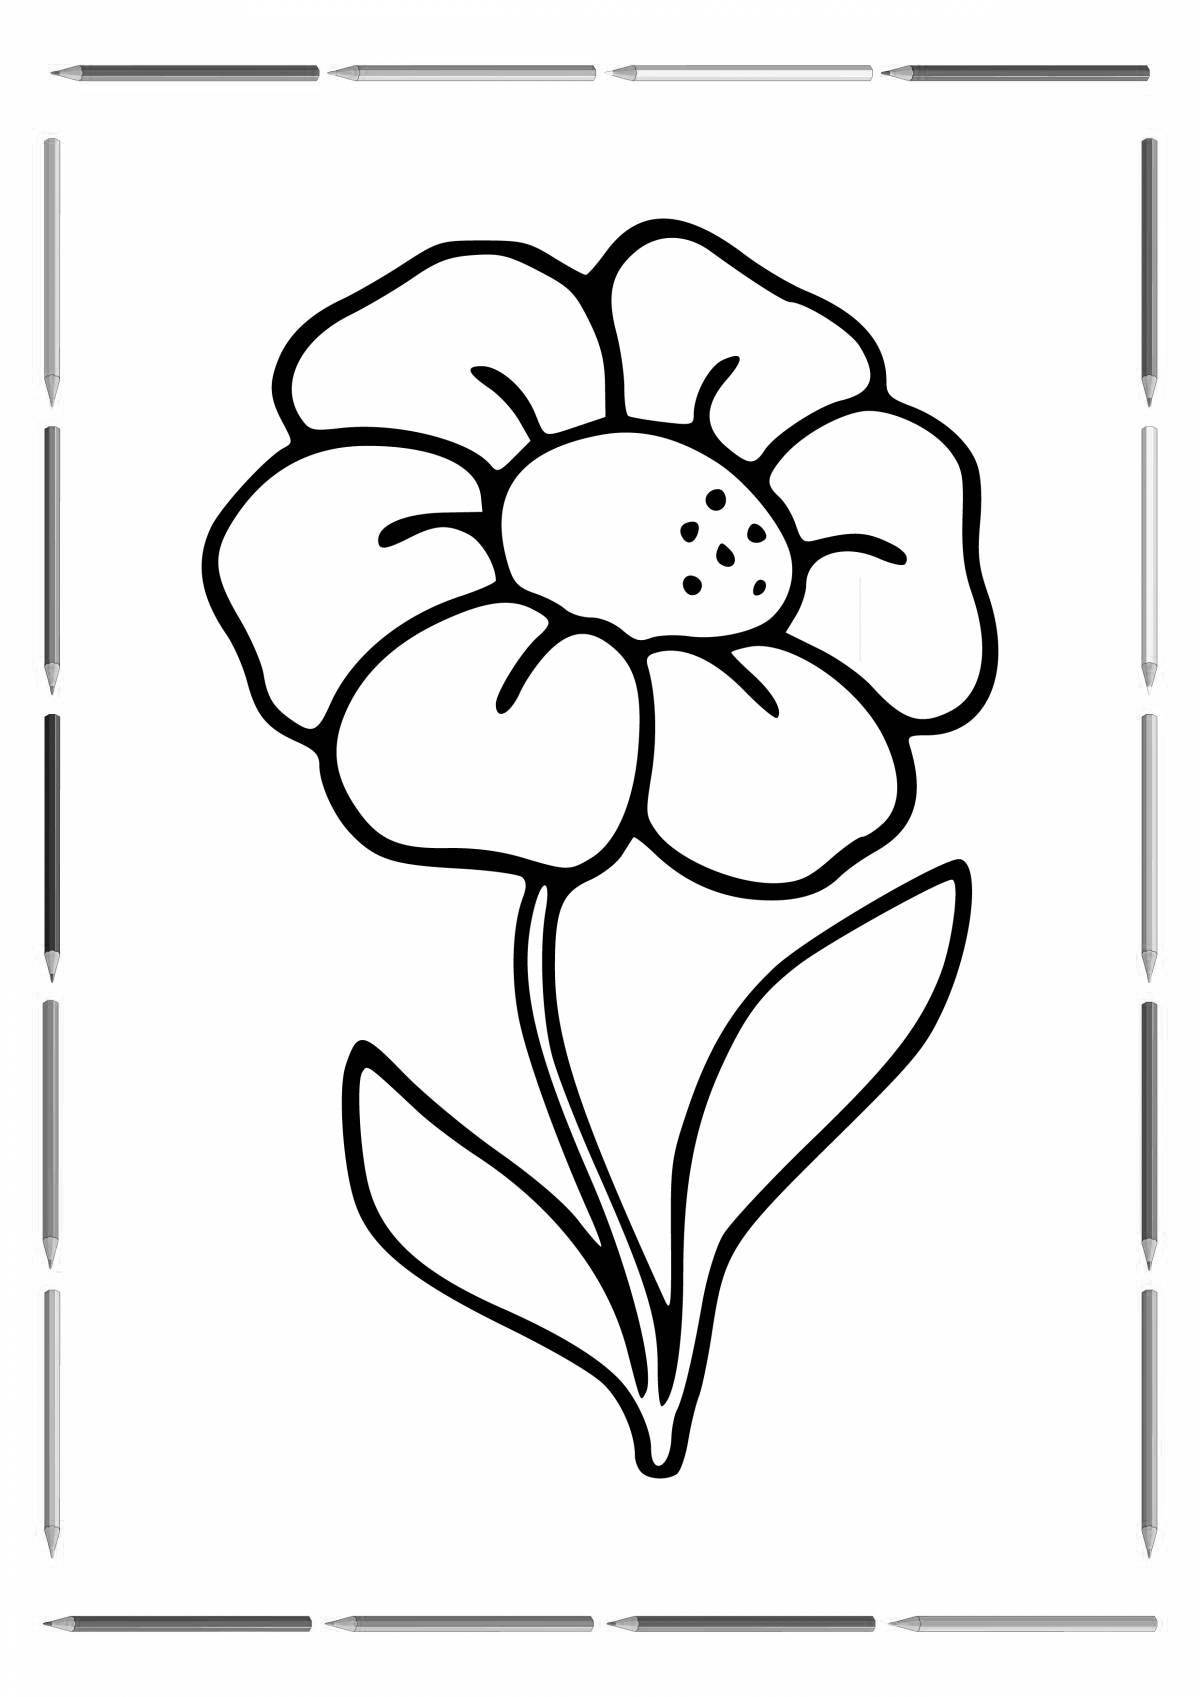 Luminous flower coloring picture for kids